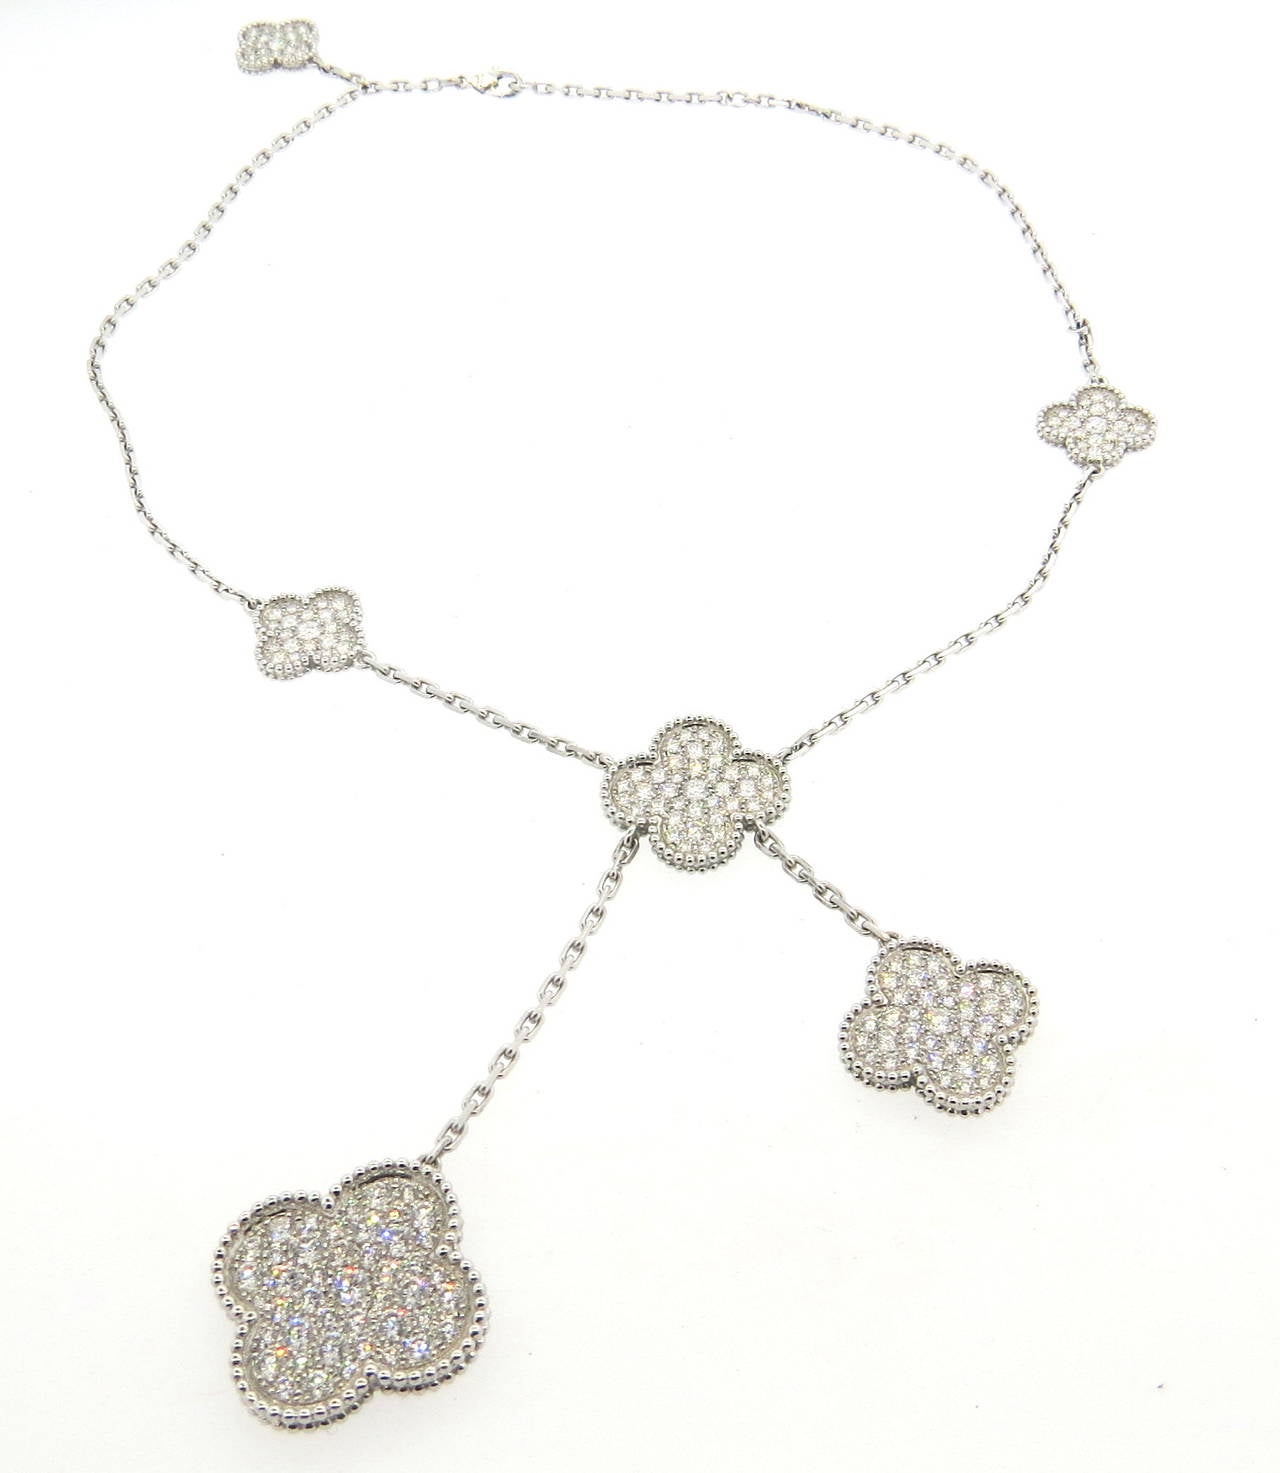 An 18k white gold necklace set with 6.17 carats of DEF / IF-VVS.  Crafted by Van Cleef & Arpels, the necklace measures 16.55